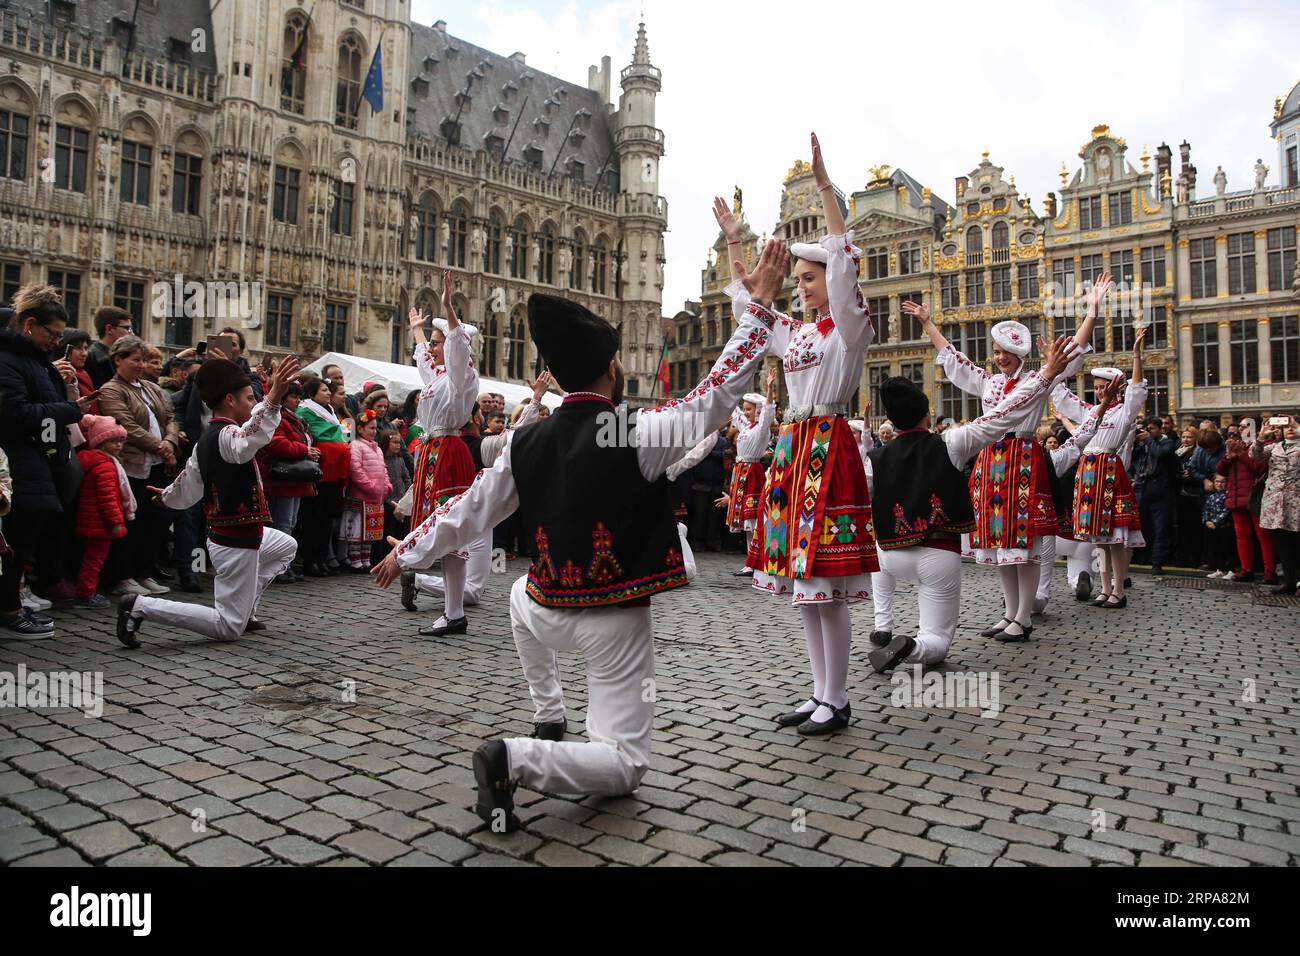 (190428) -- BRUSSELS, April 28, 2019 -- Dancers perform the Bulgarian folk dance on the last day of the 2019 Balkan Trafik at the Grand Place in Brussels, Belgium, April 28, 2019. The festival aims to share the artistic and festive cultures of the Balkans in south-eastern Europe. ) BELGIUM-BRUSSELS-BALKAN TRAFIK ZhengxHuansong PUBLICATIONxNOTxINxCHN Stock Photo